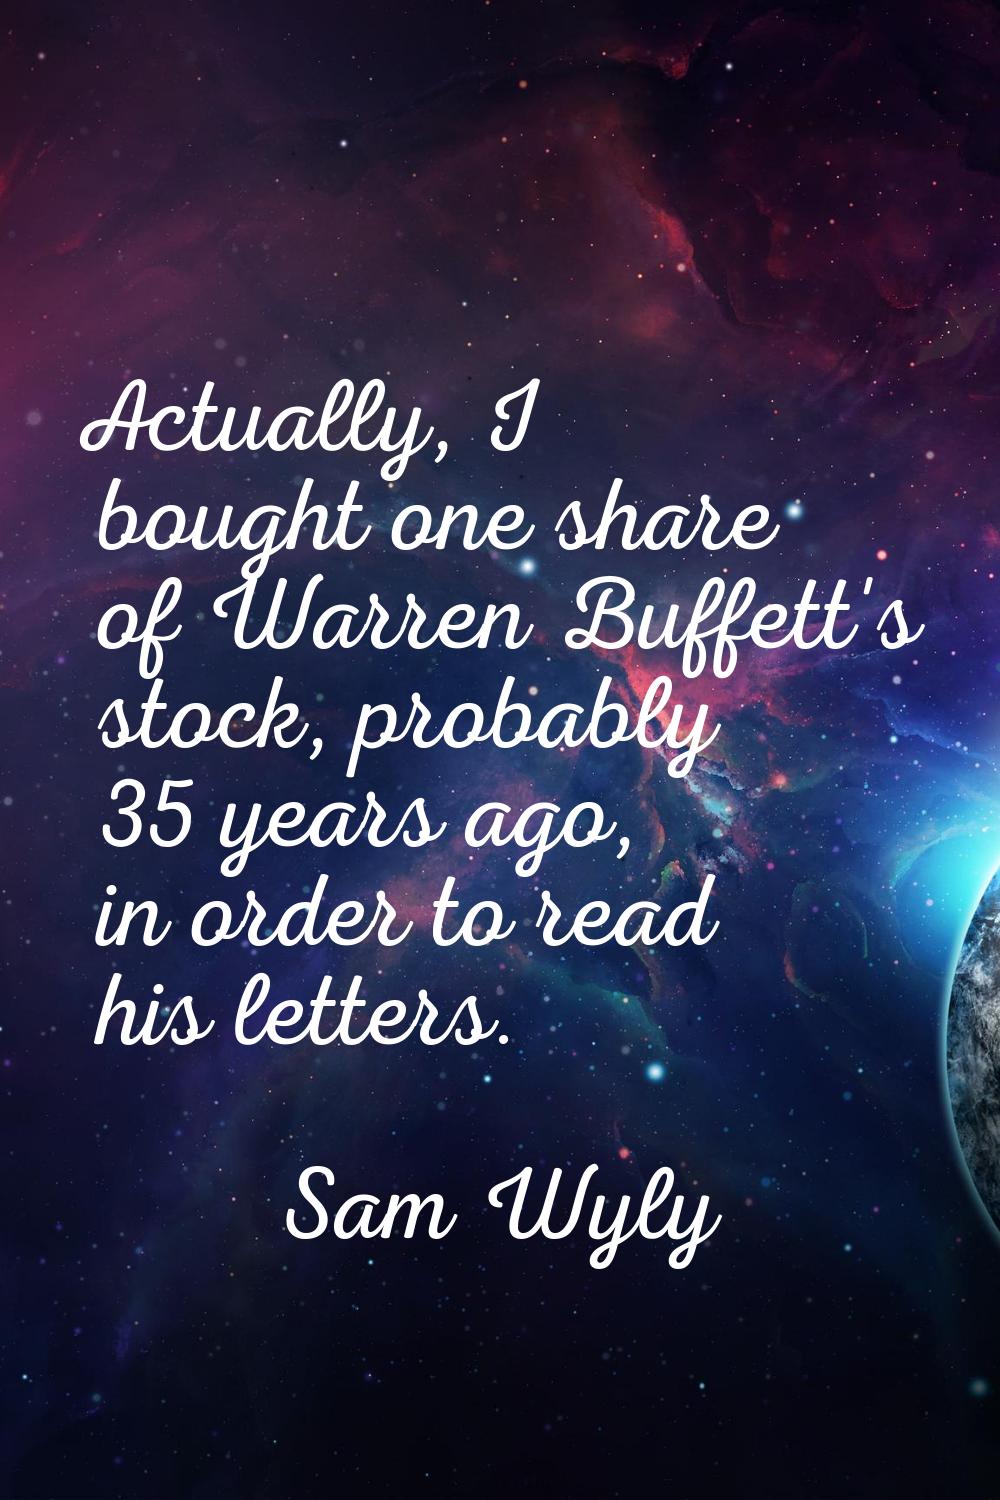 Actually, I bought one share of Warren Buffett's stock, probably 35 years ago, in order to read his